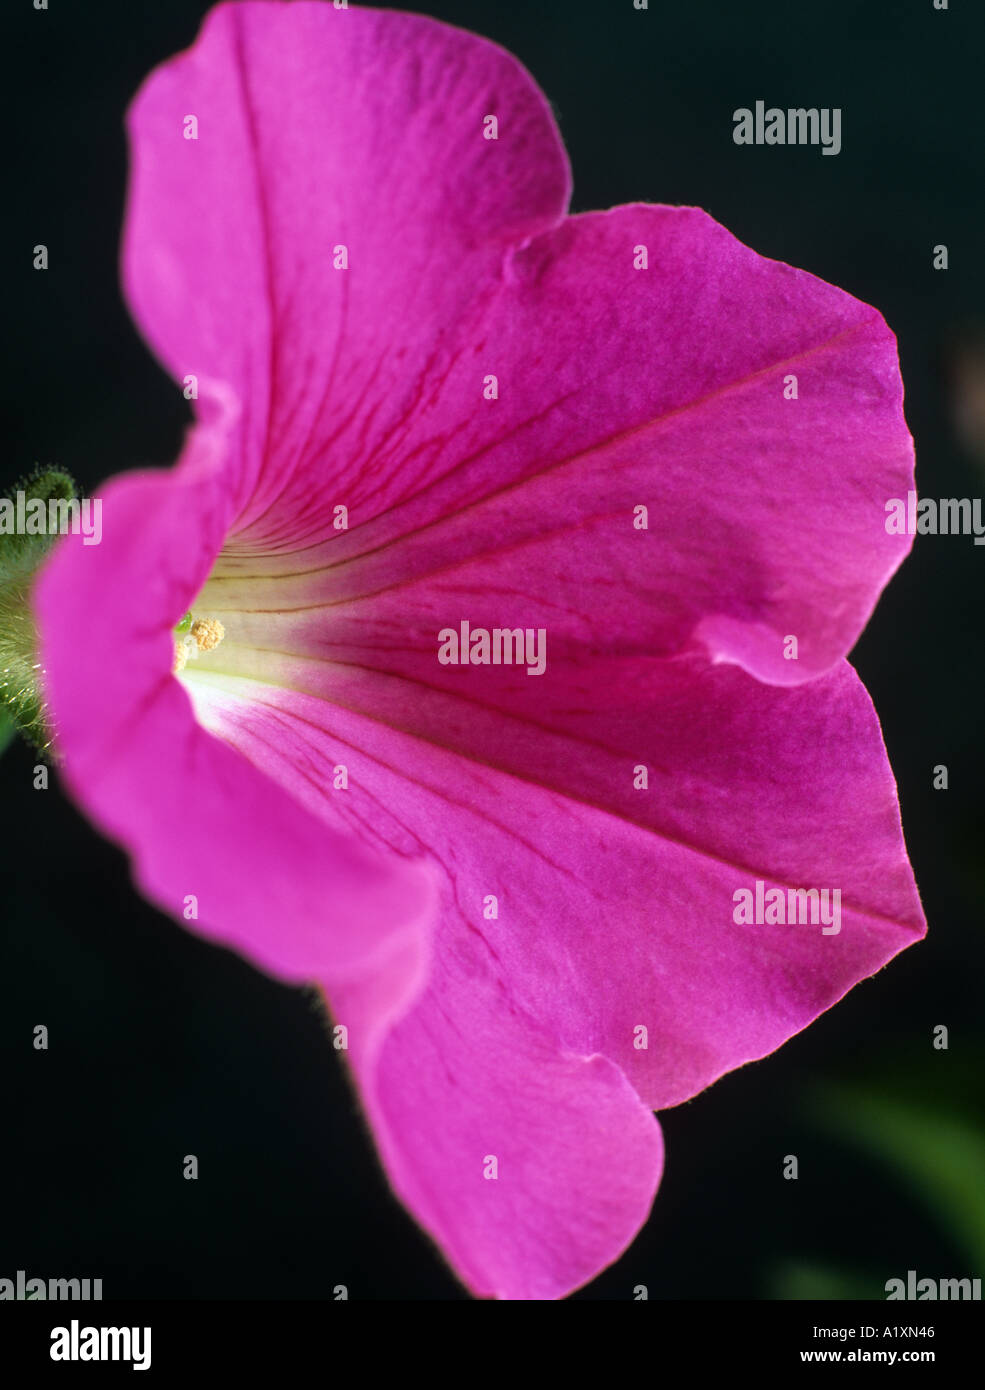 Multiflora trailing Petunia Pink Wave in close up focused on centre in daylight against dark background Stock Photo